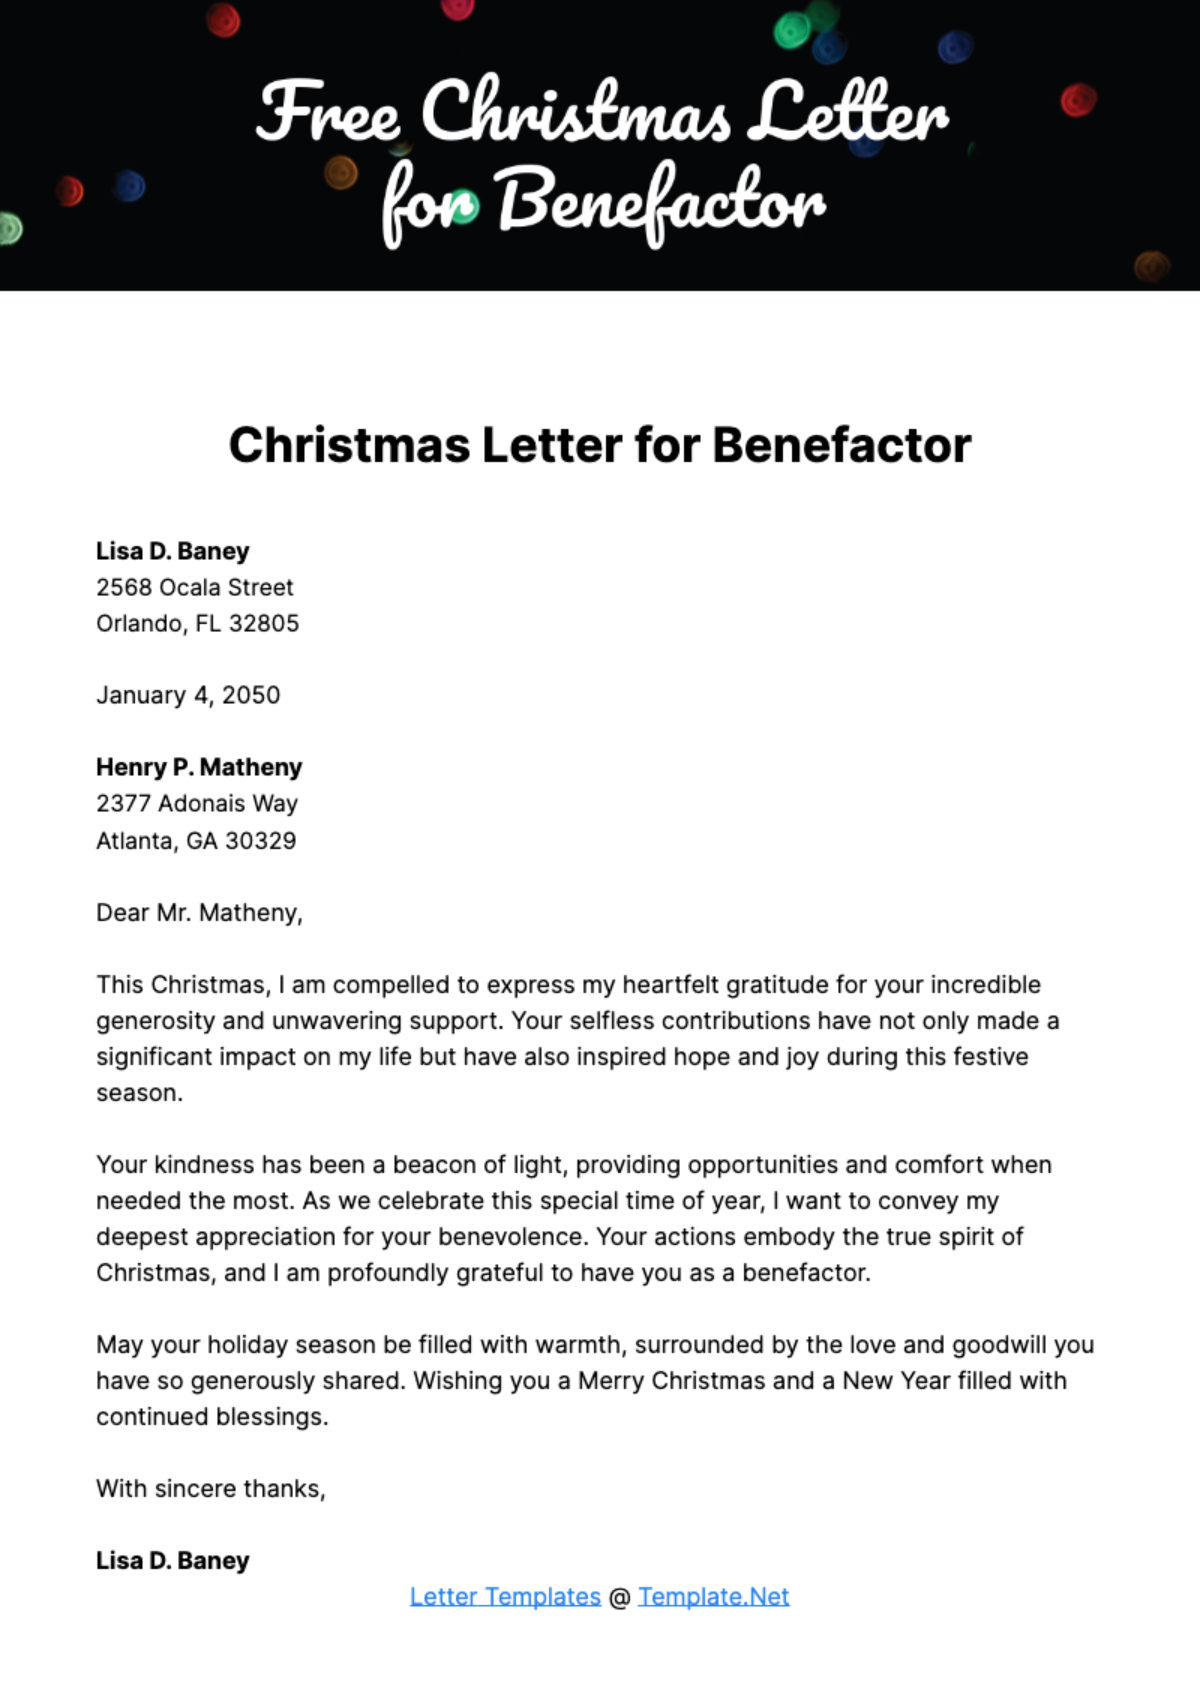 Free Christmas Letter for Benefactor Template